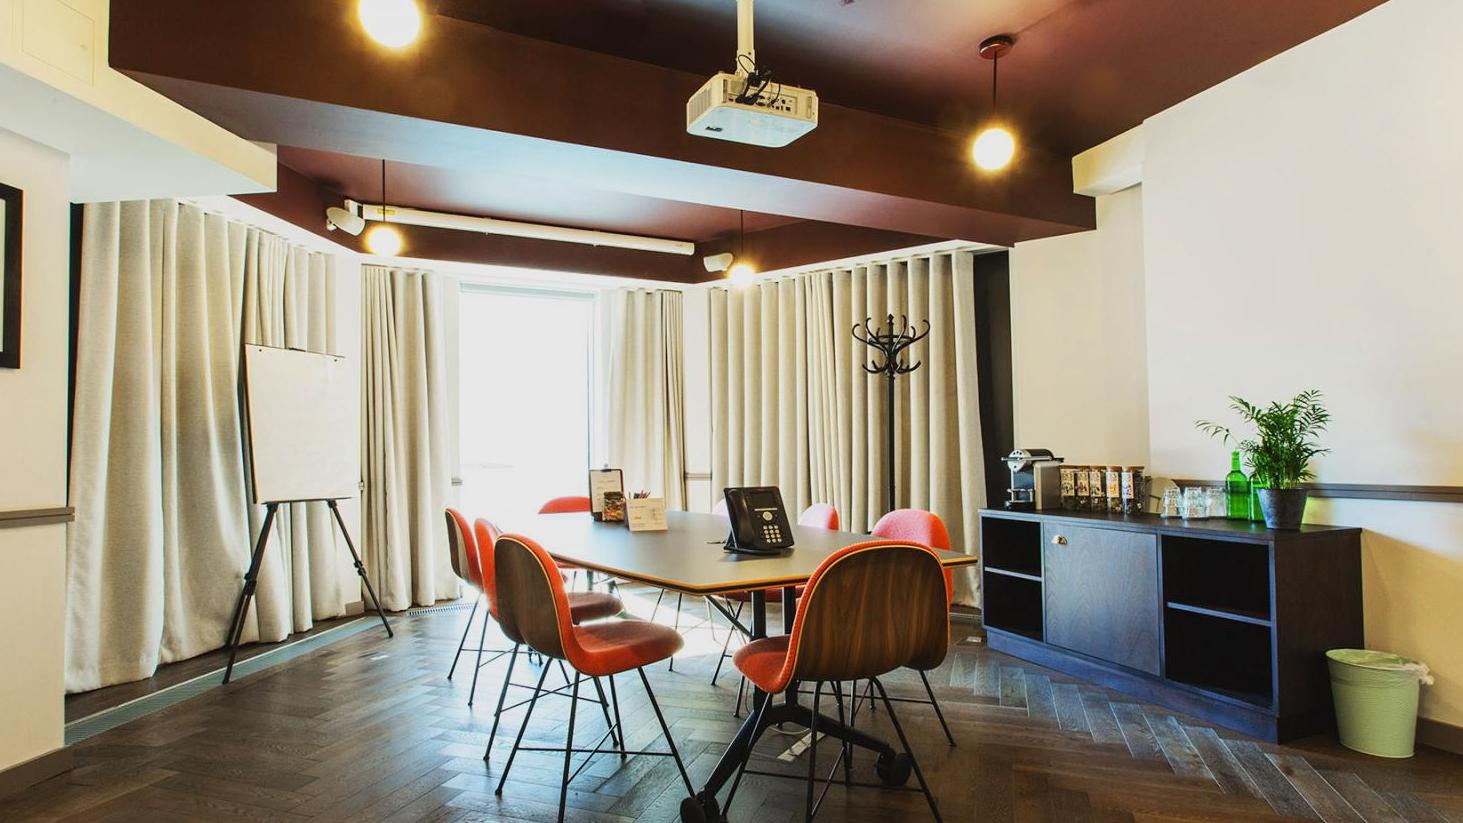 Meeting Rooms for Hire in Covent Garden